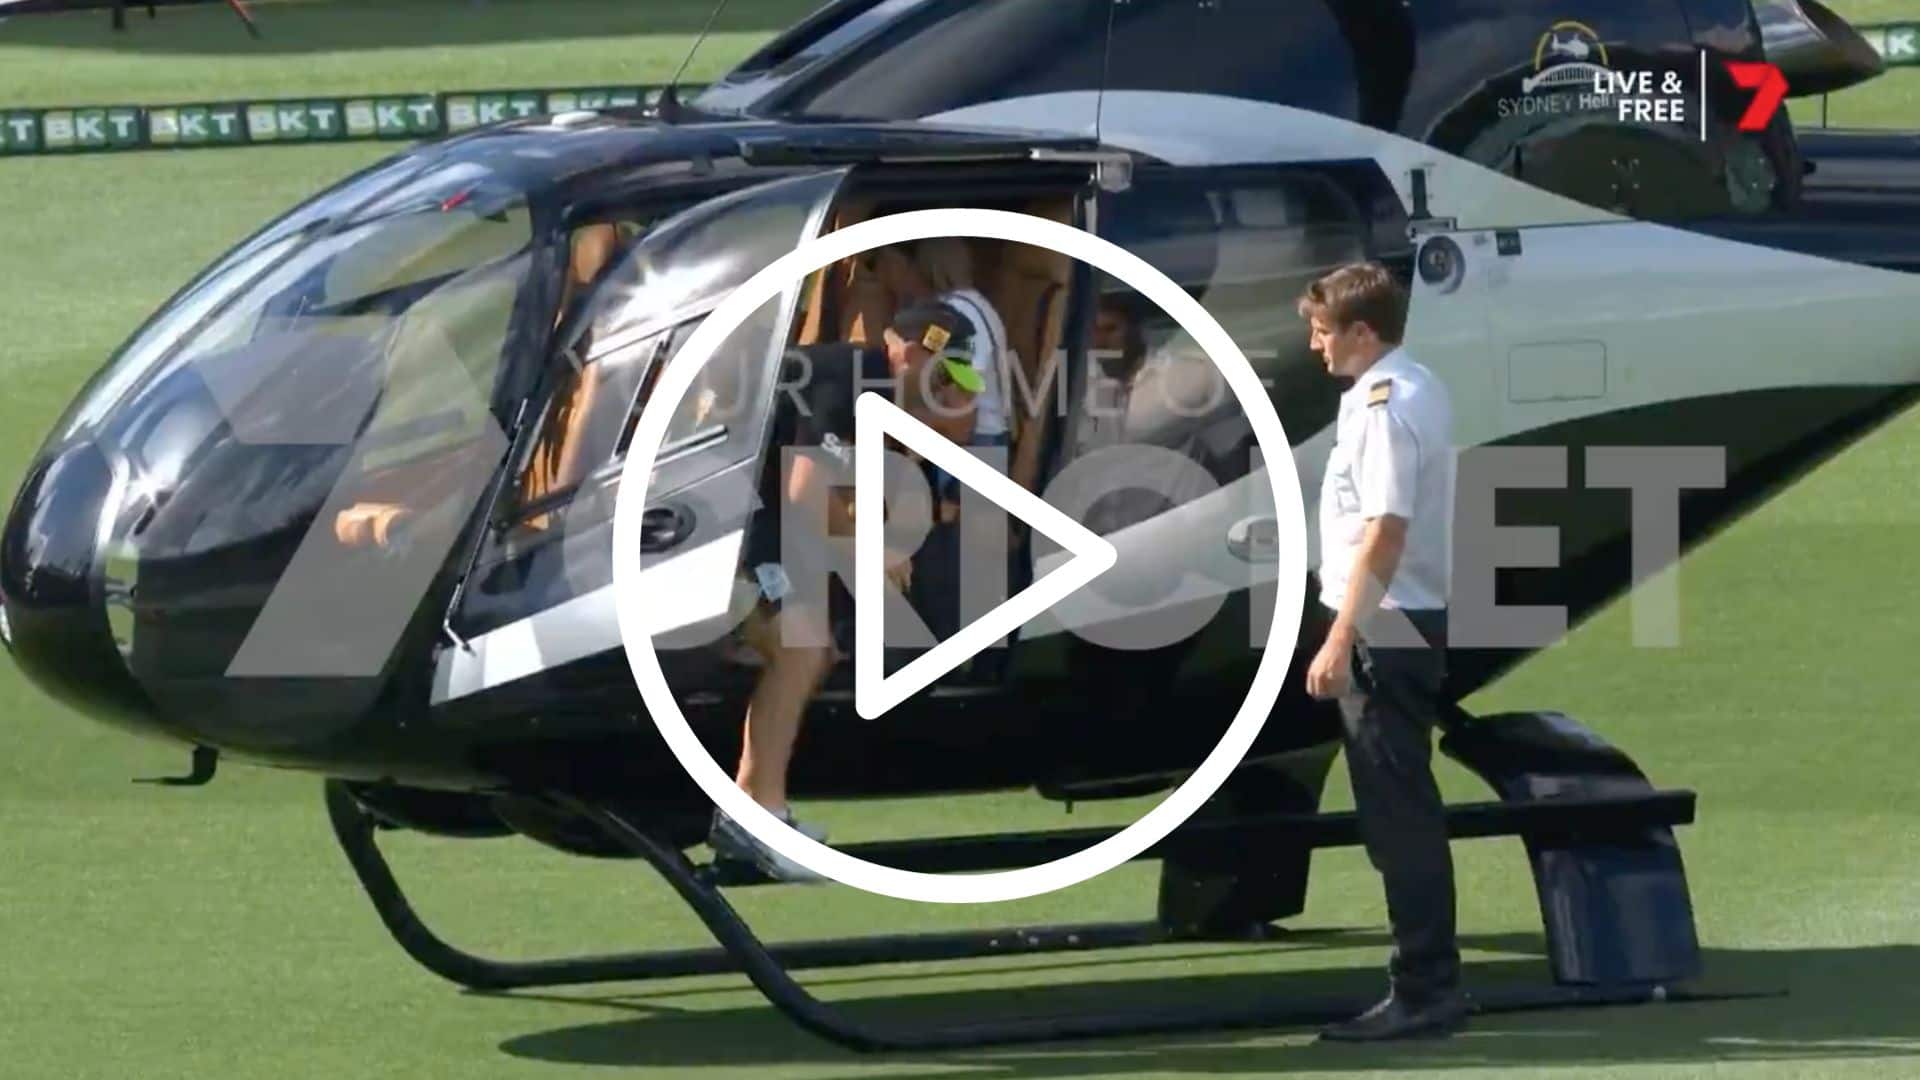 [WATCH] David Warner's Helicopter Lands At SCG Outfield Ahead Of Pivotal BBL Clash